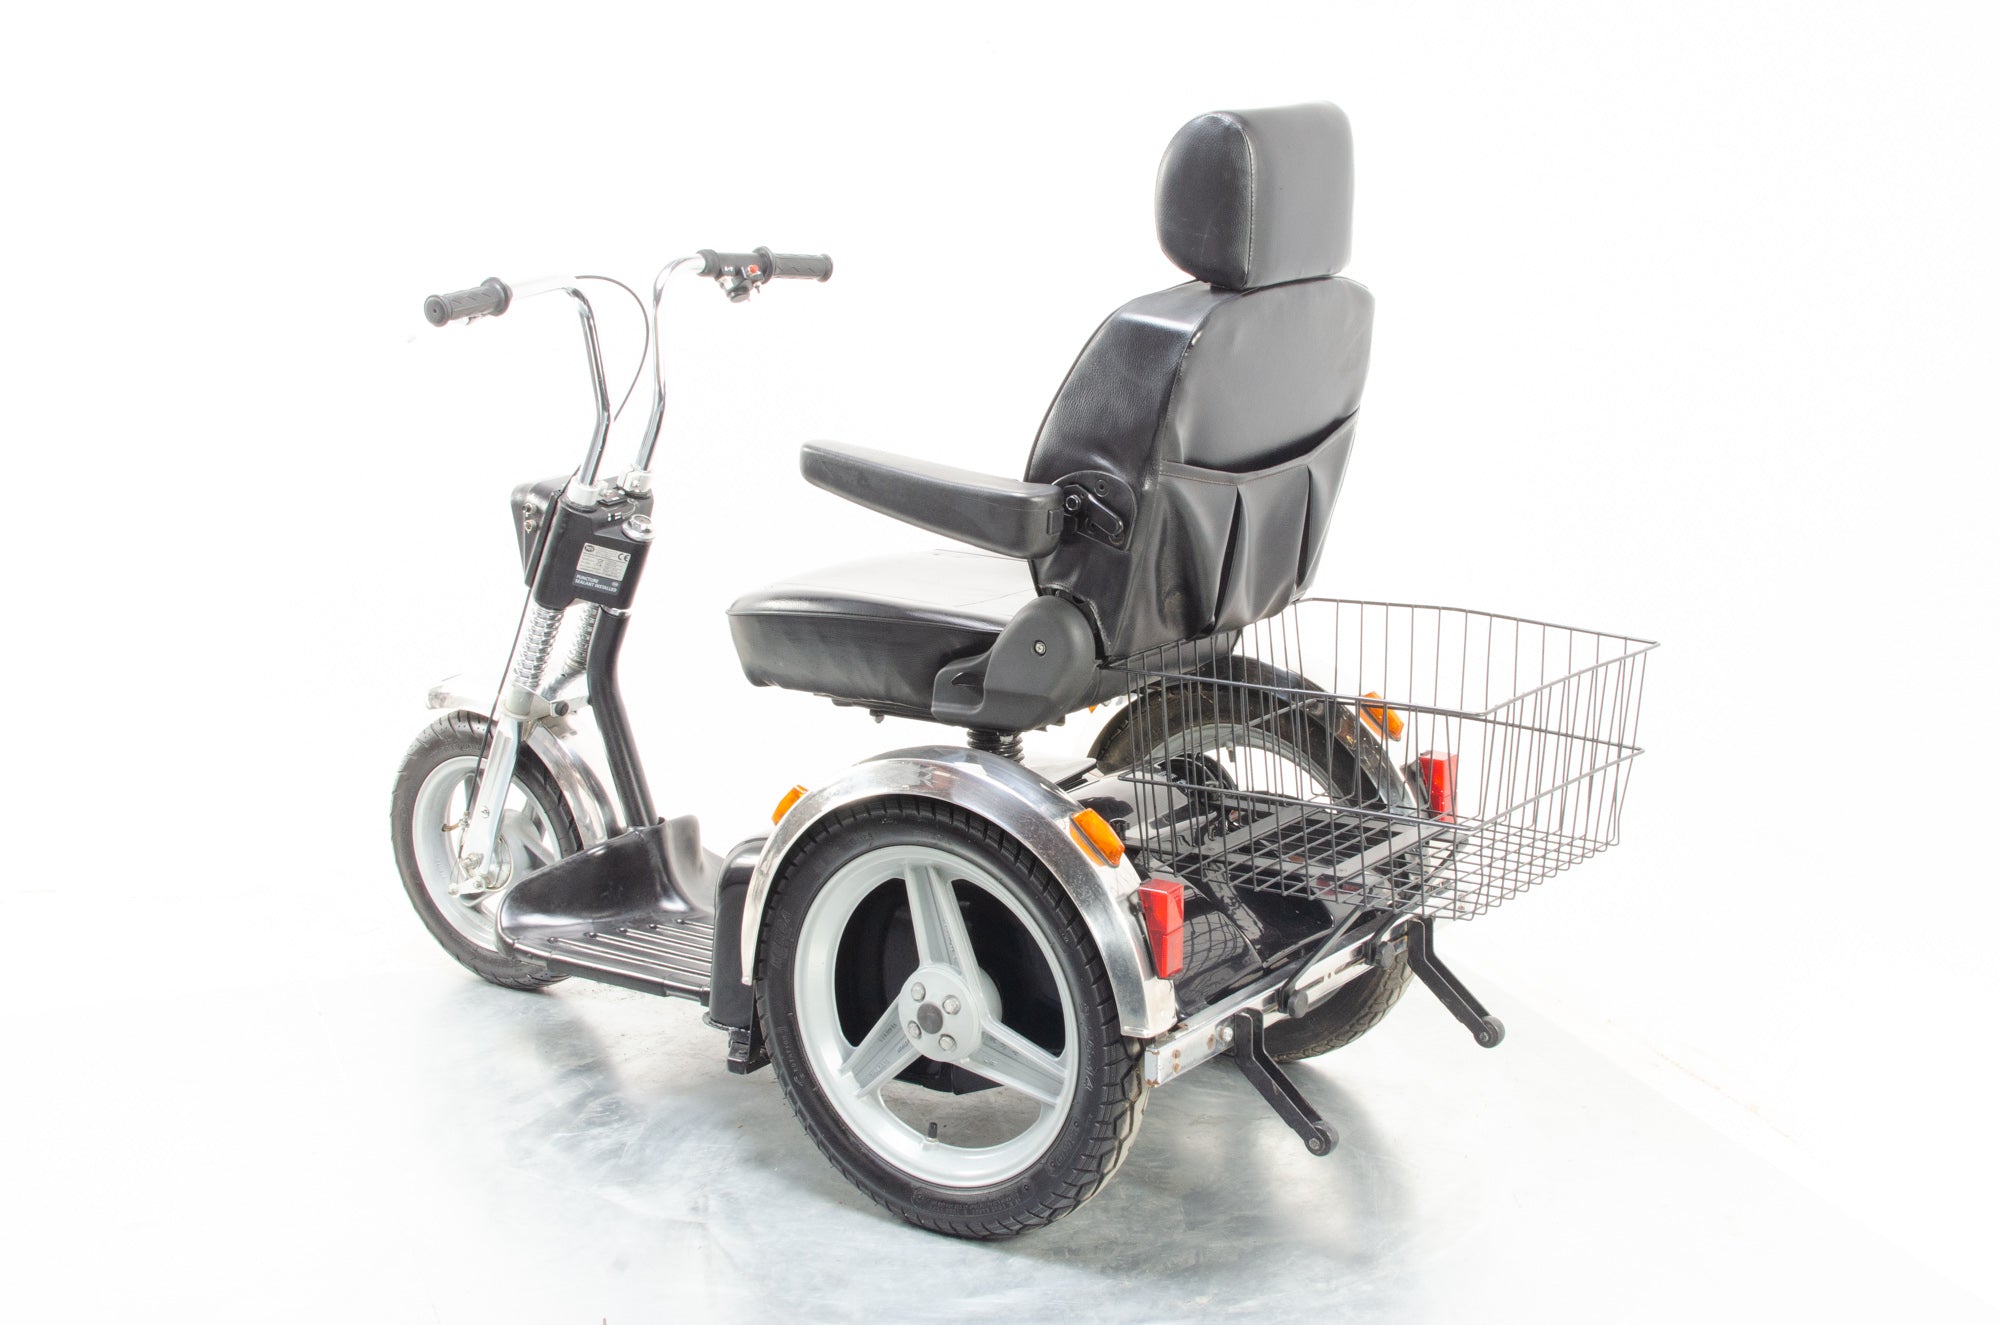 TGA Supersport Used Mobility Scooter 8mph Trike 3-Wheel Motorbike All-Terrain Large